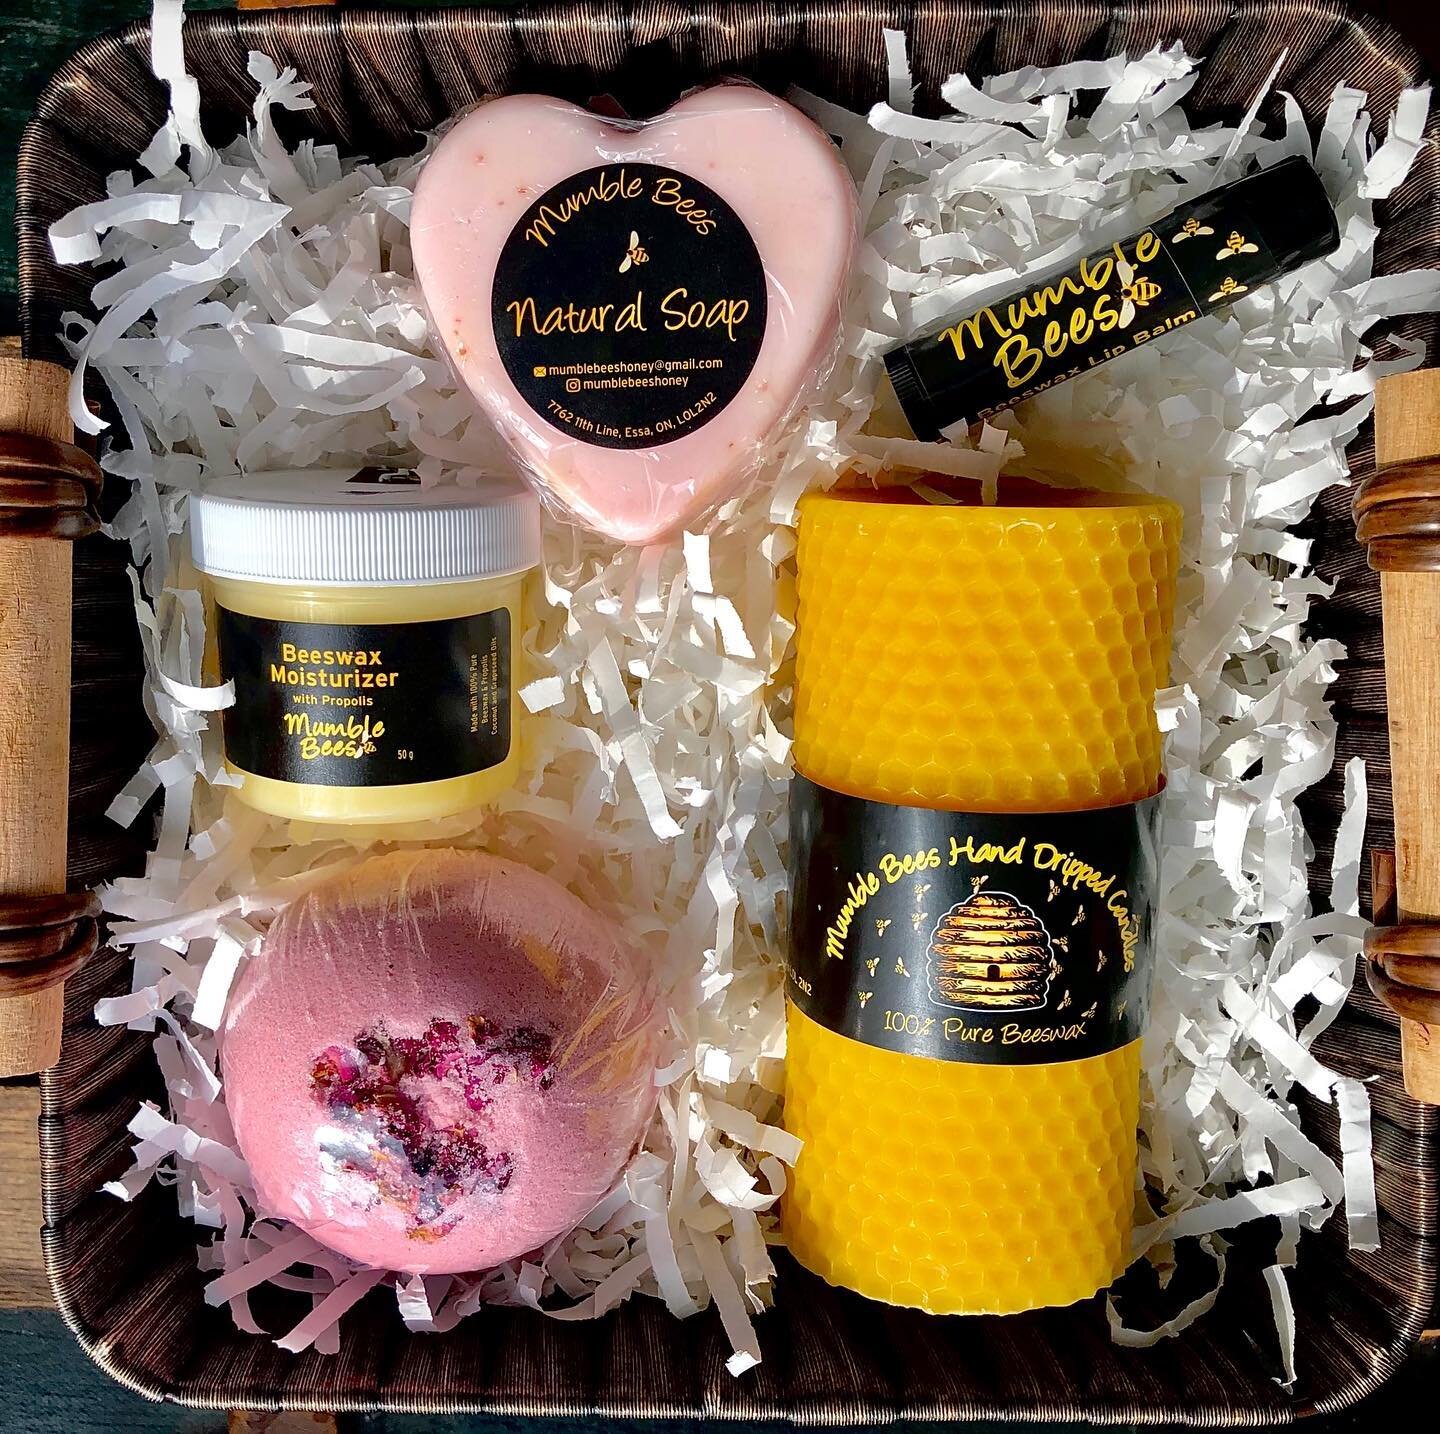 The girls are back to offer another GIVEAWAY🐝
⁣
What's included? Valentine's Essentials 💕⁣
⁣
- 100% pure Beeswax Candle⁣
- Lavender Moisturizer ⁣
- Roses for you Soap ⁣
- Berry in Love Bath Bomb⁣
- Beeswax Lip Balm⁣

⁣ *𝘈𝘭𝘭 𝘩𝘢𝘯𝘥𝘤𝘳𝘢𝘧𝘵𝘦?